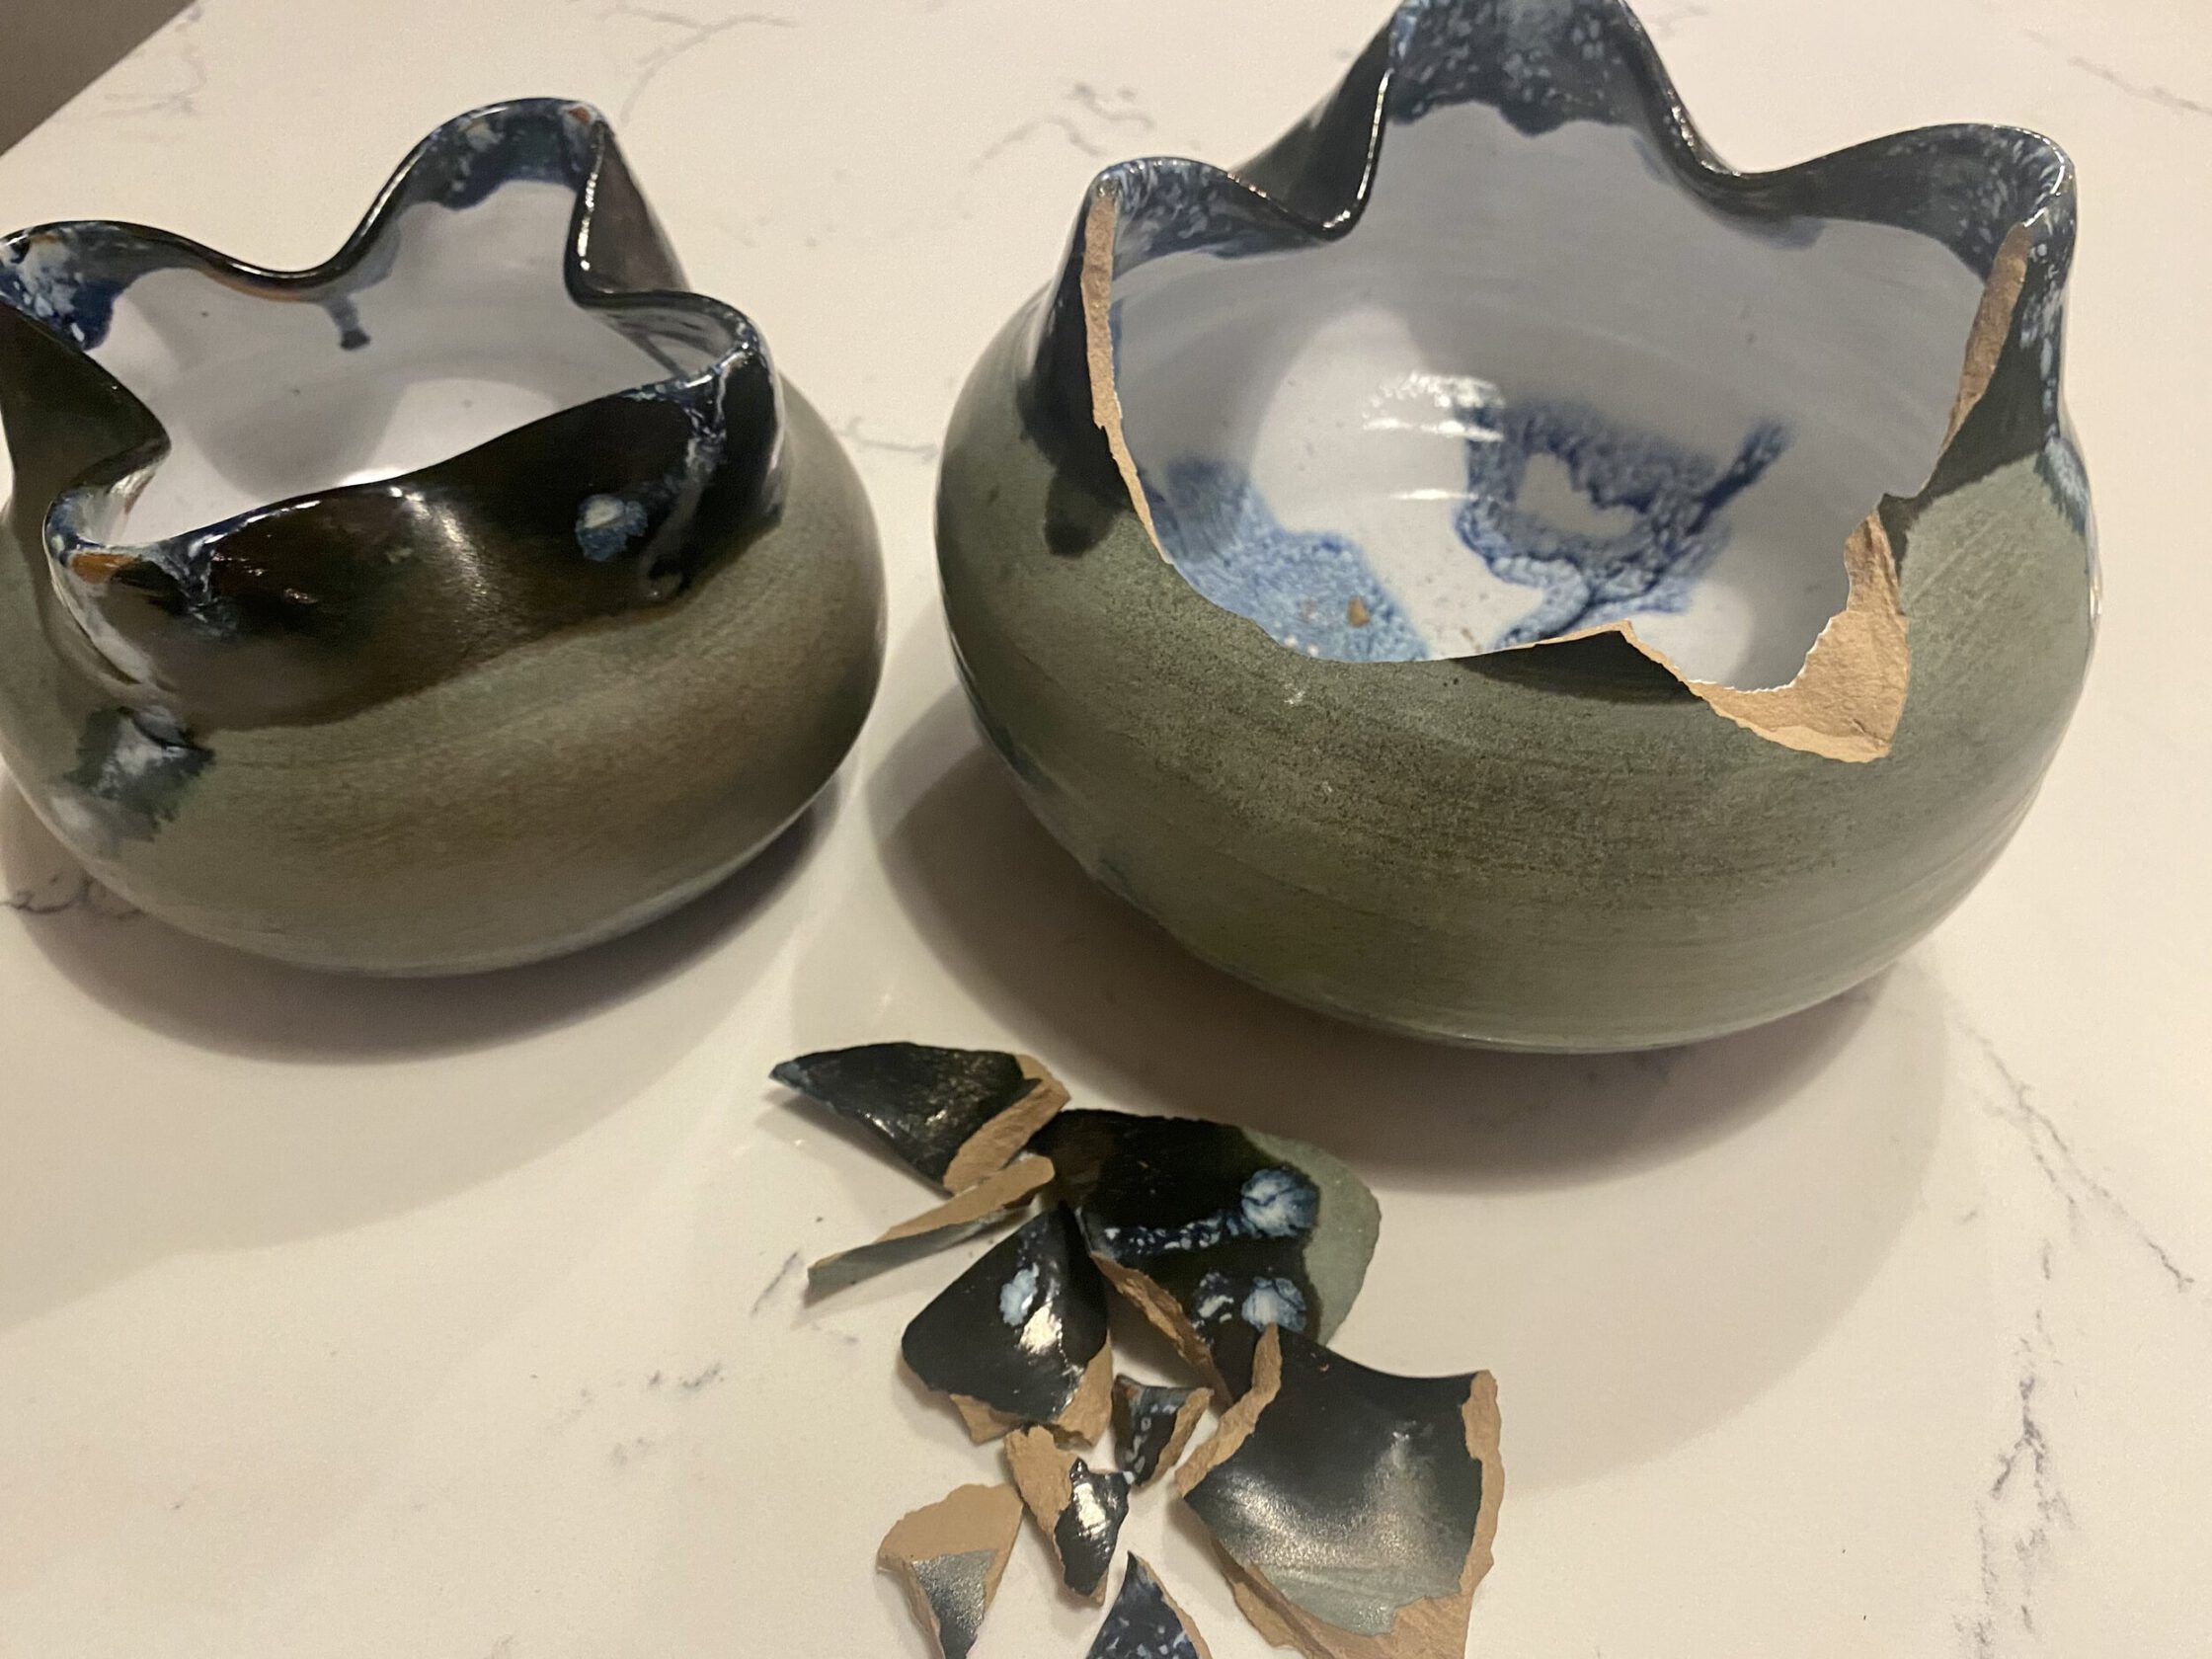 The Shattered Vase: A Reflection of my Broken Life